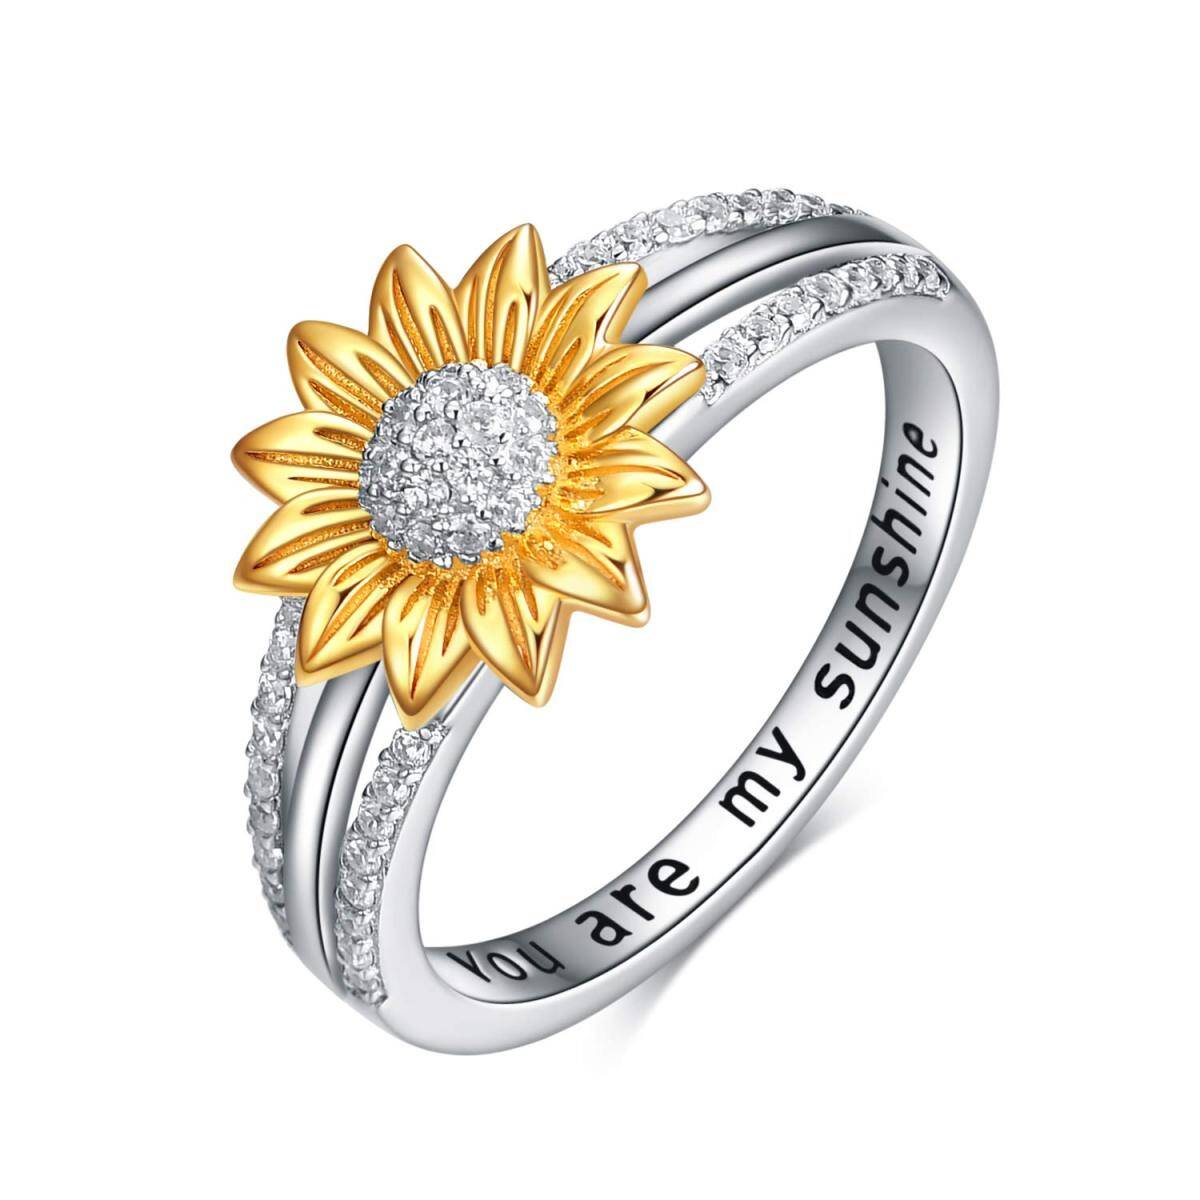 Sterling Silver Two-tone Circular Shaped Cubic Zirconia Sunflower Ring with Engraved Word-1